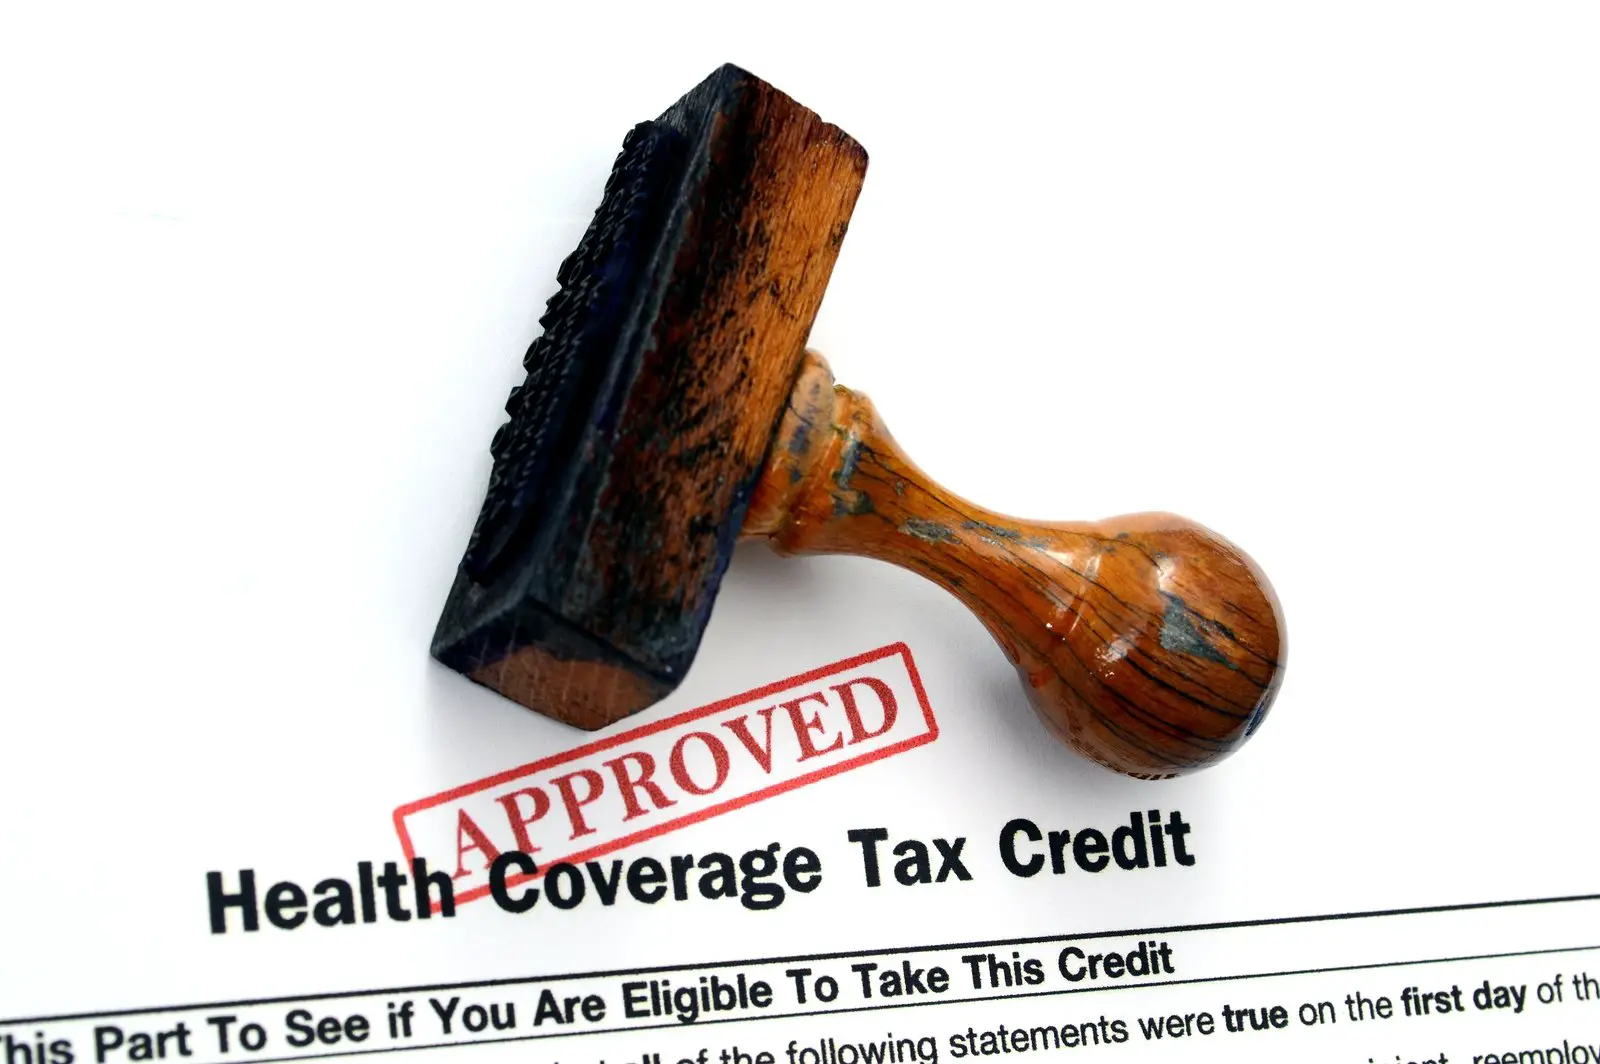 How the Health Insurance Premium Tax Credit Affects Your 2014 Return